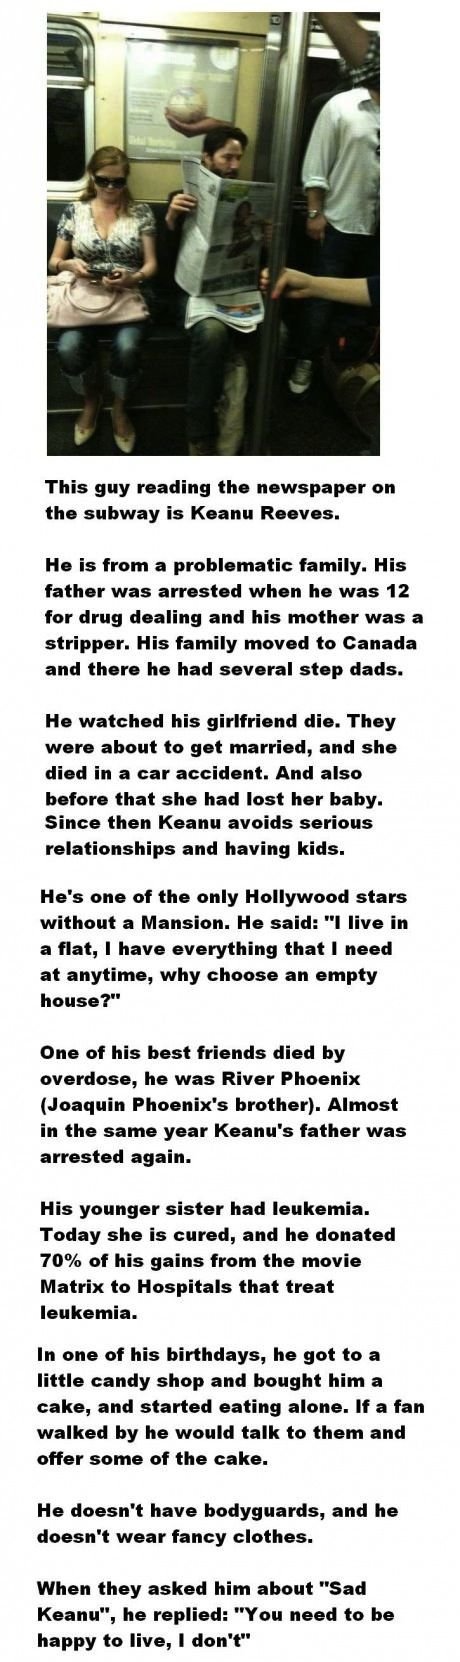 A story about Keanu Reeves.